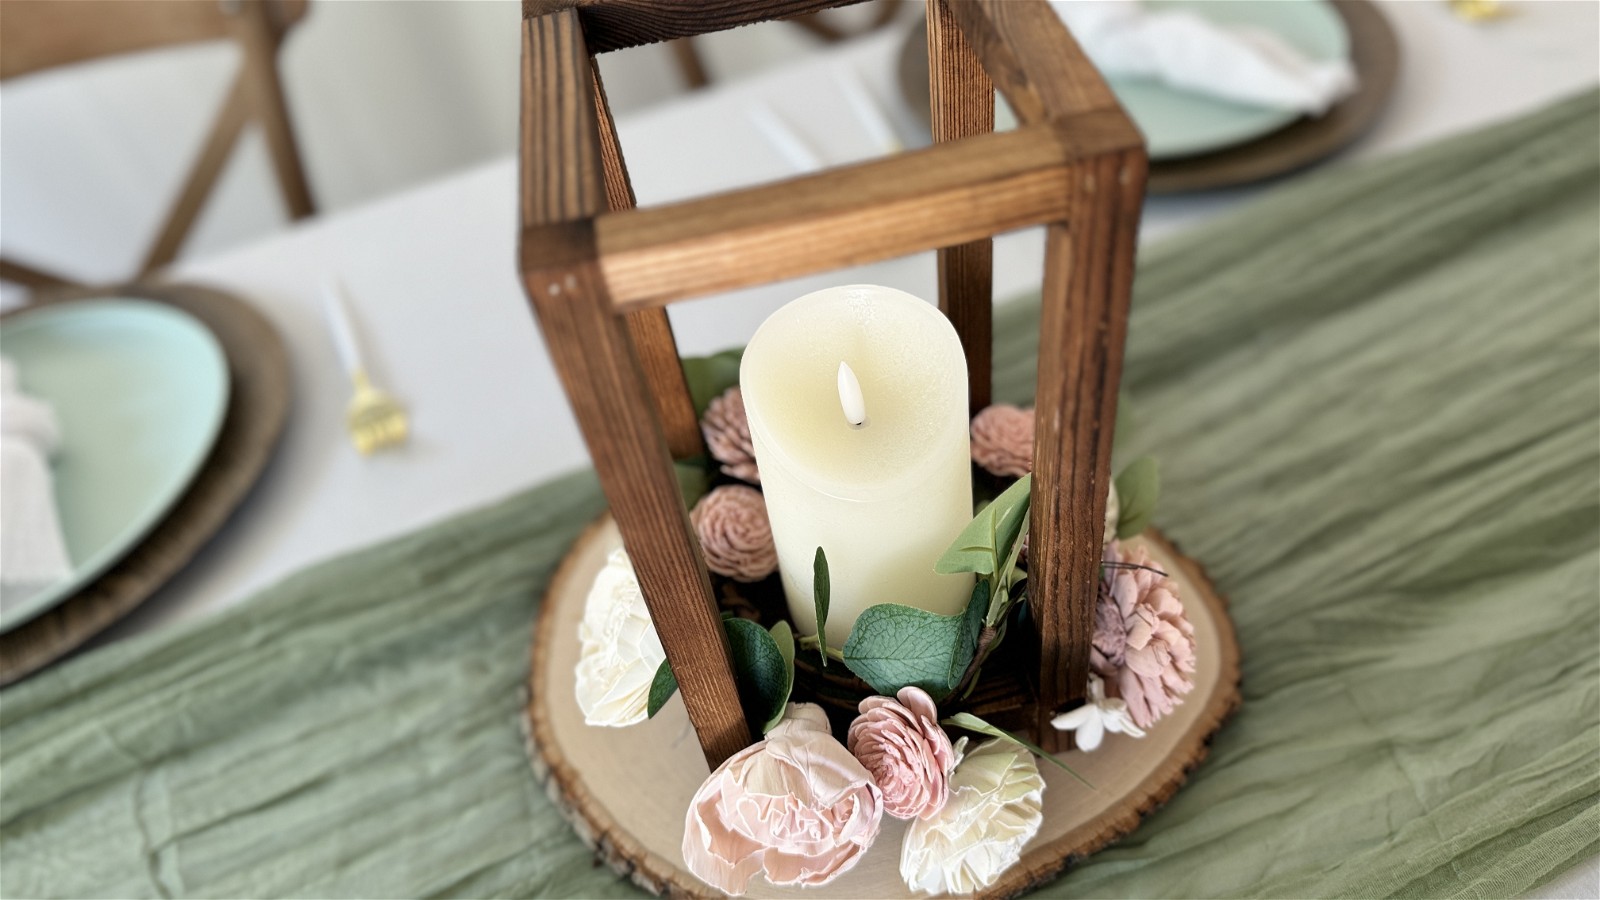 Image of Floral Lantern with Candle - DIY Wedding Centerpiece Step-by-Step Instructions and Tutorial